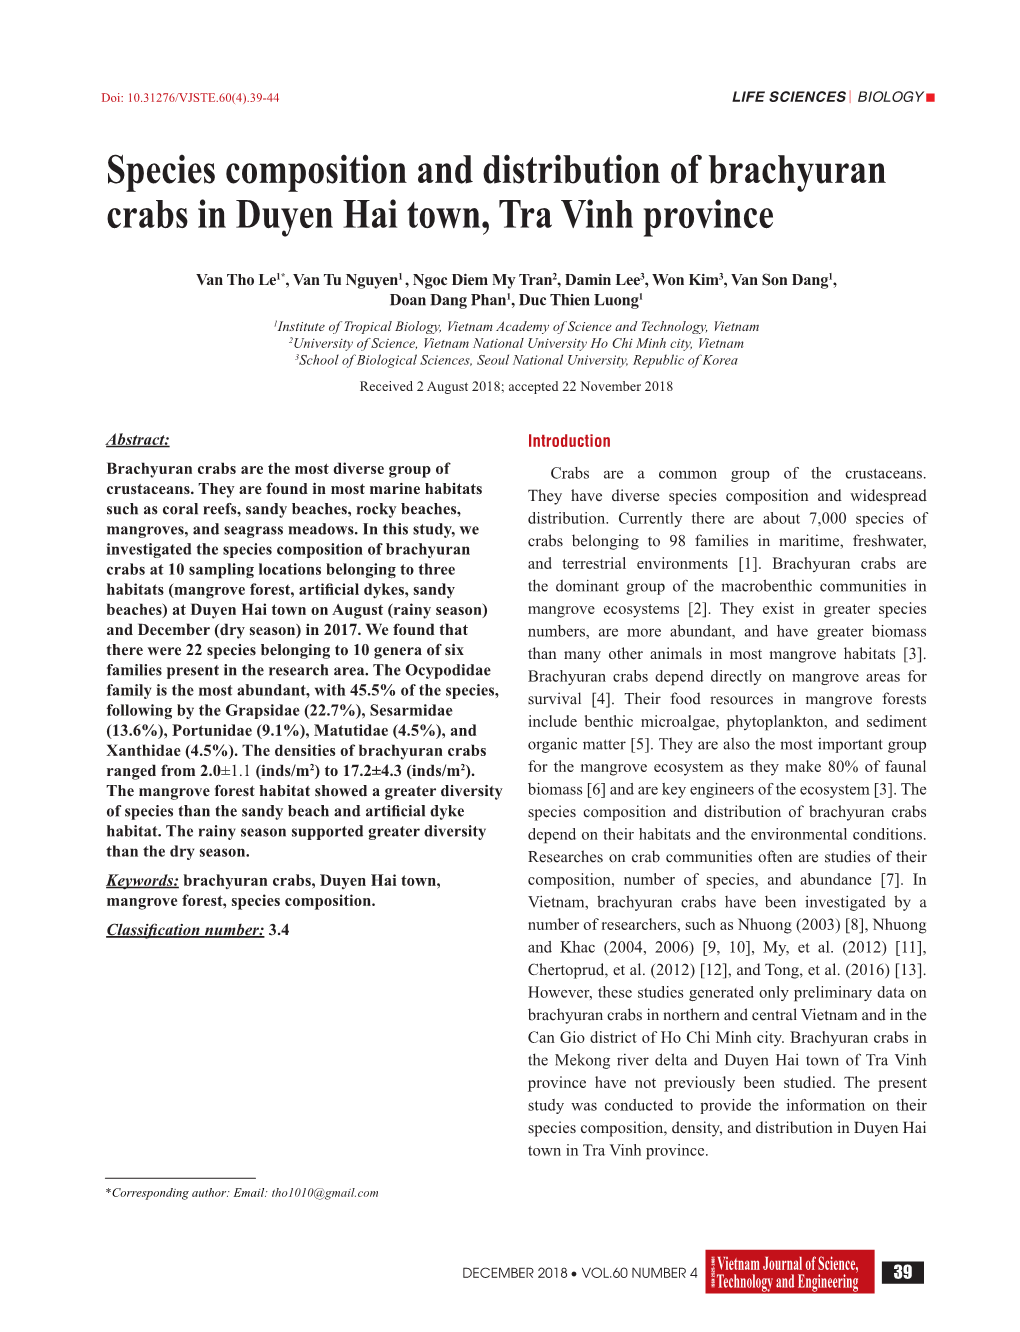 Species Composition and Distribution of Brachyuran Crabs in Duyen Hai Town, Tra Vinh Province